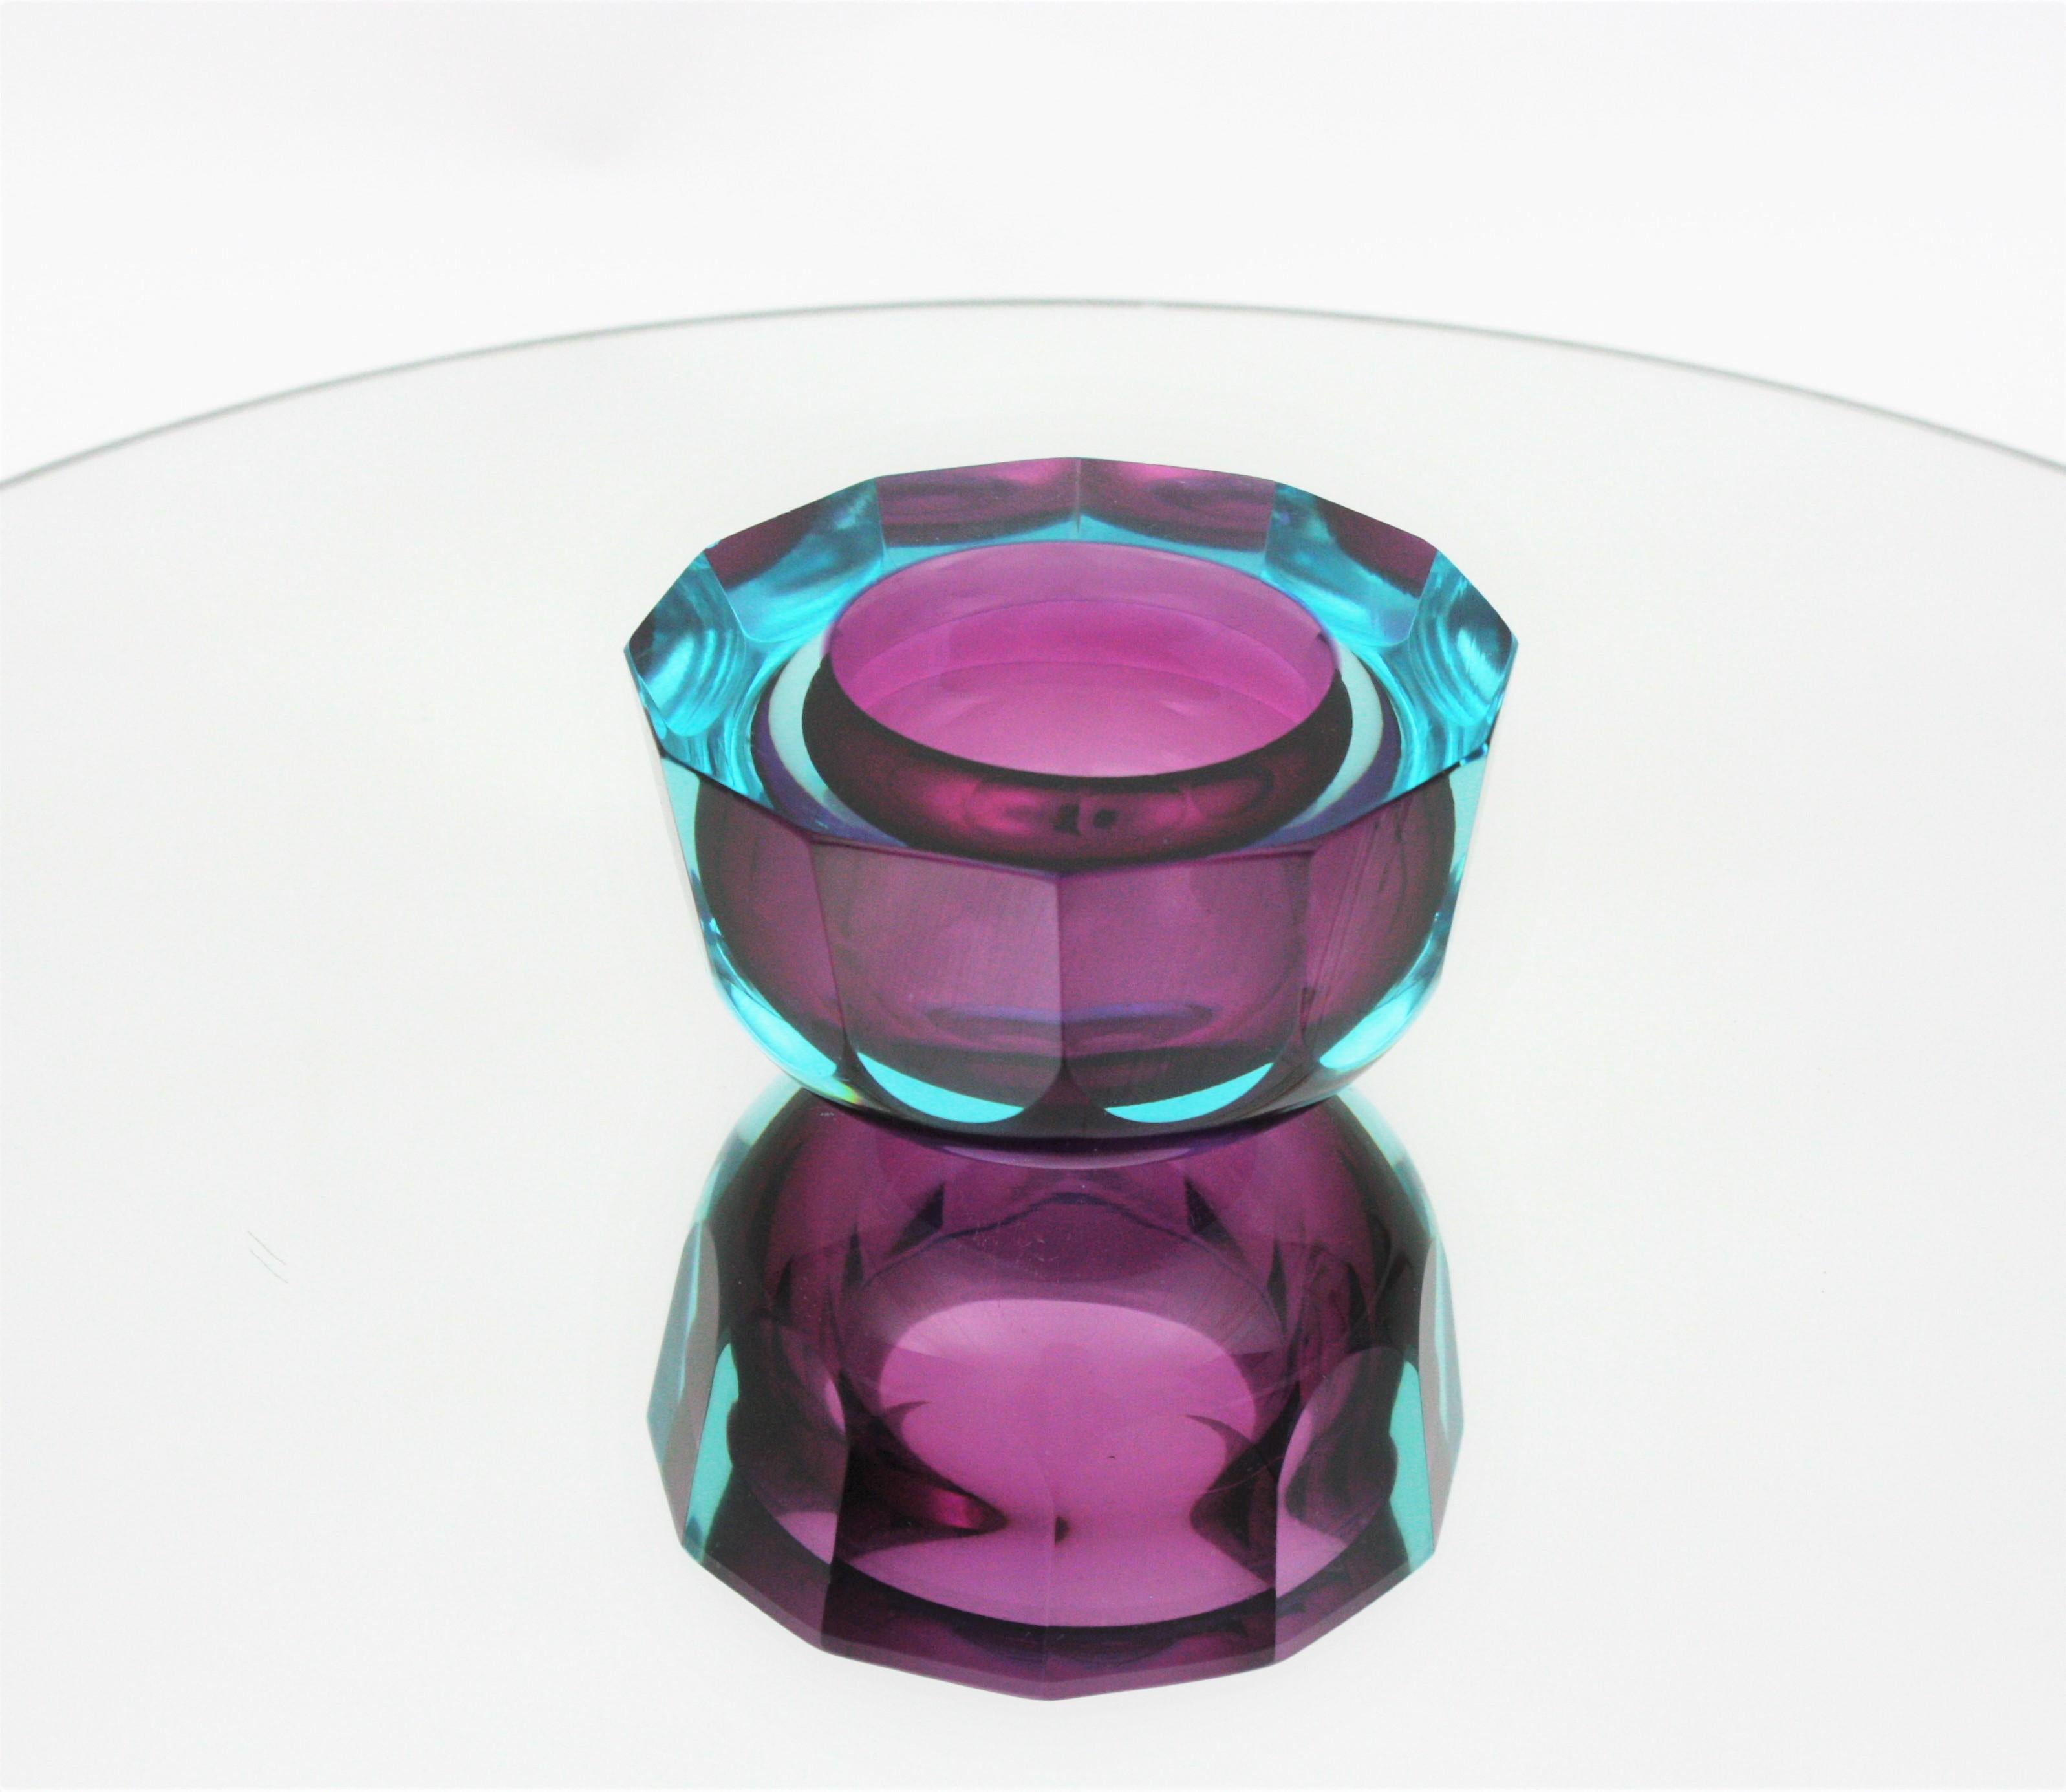 Mid-Century Modern Flavio Poli for Seguso Vetri d'Arte round faceted purple/ and blue Murano glass Sommerso bowl, Italy, 1960s.
This hand blown glass bowl is made of purple glass submerged into blue glass. Designed with geode shape, flat cut rim